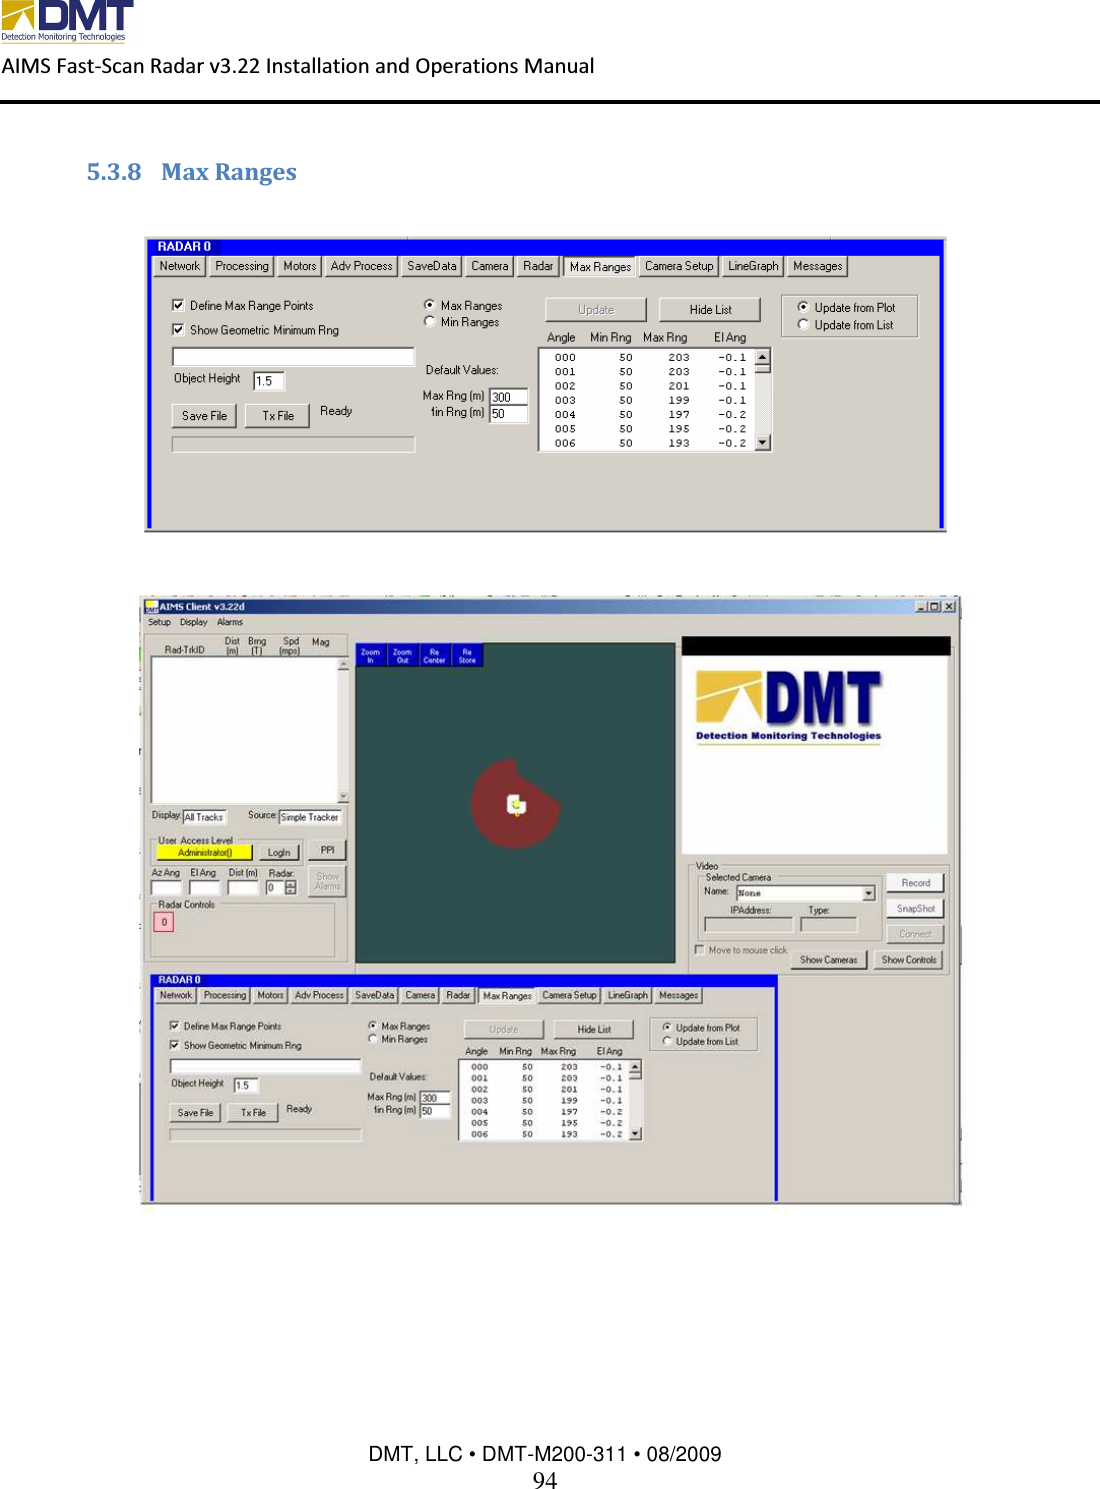  AIMS Fast-Scan Radar v3.22 Installation and Operations Manual    DMT, LLC • DMT-M200-311 • 08/2009 94  5.3.8 Max Ranges      